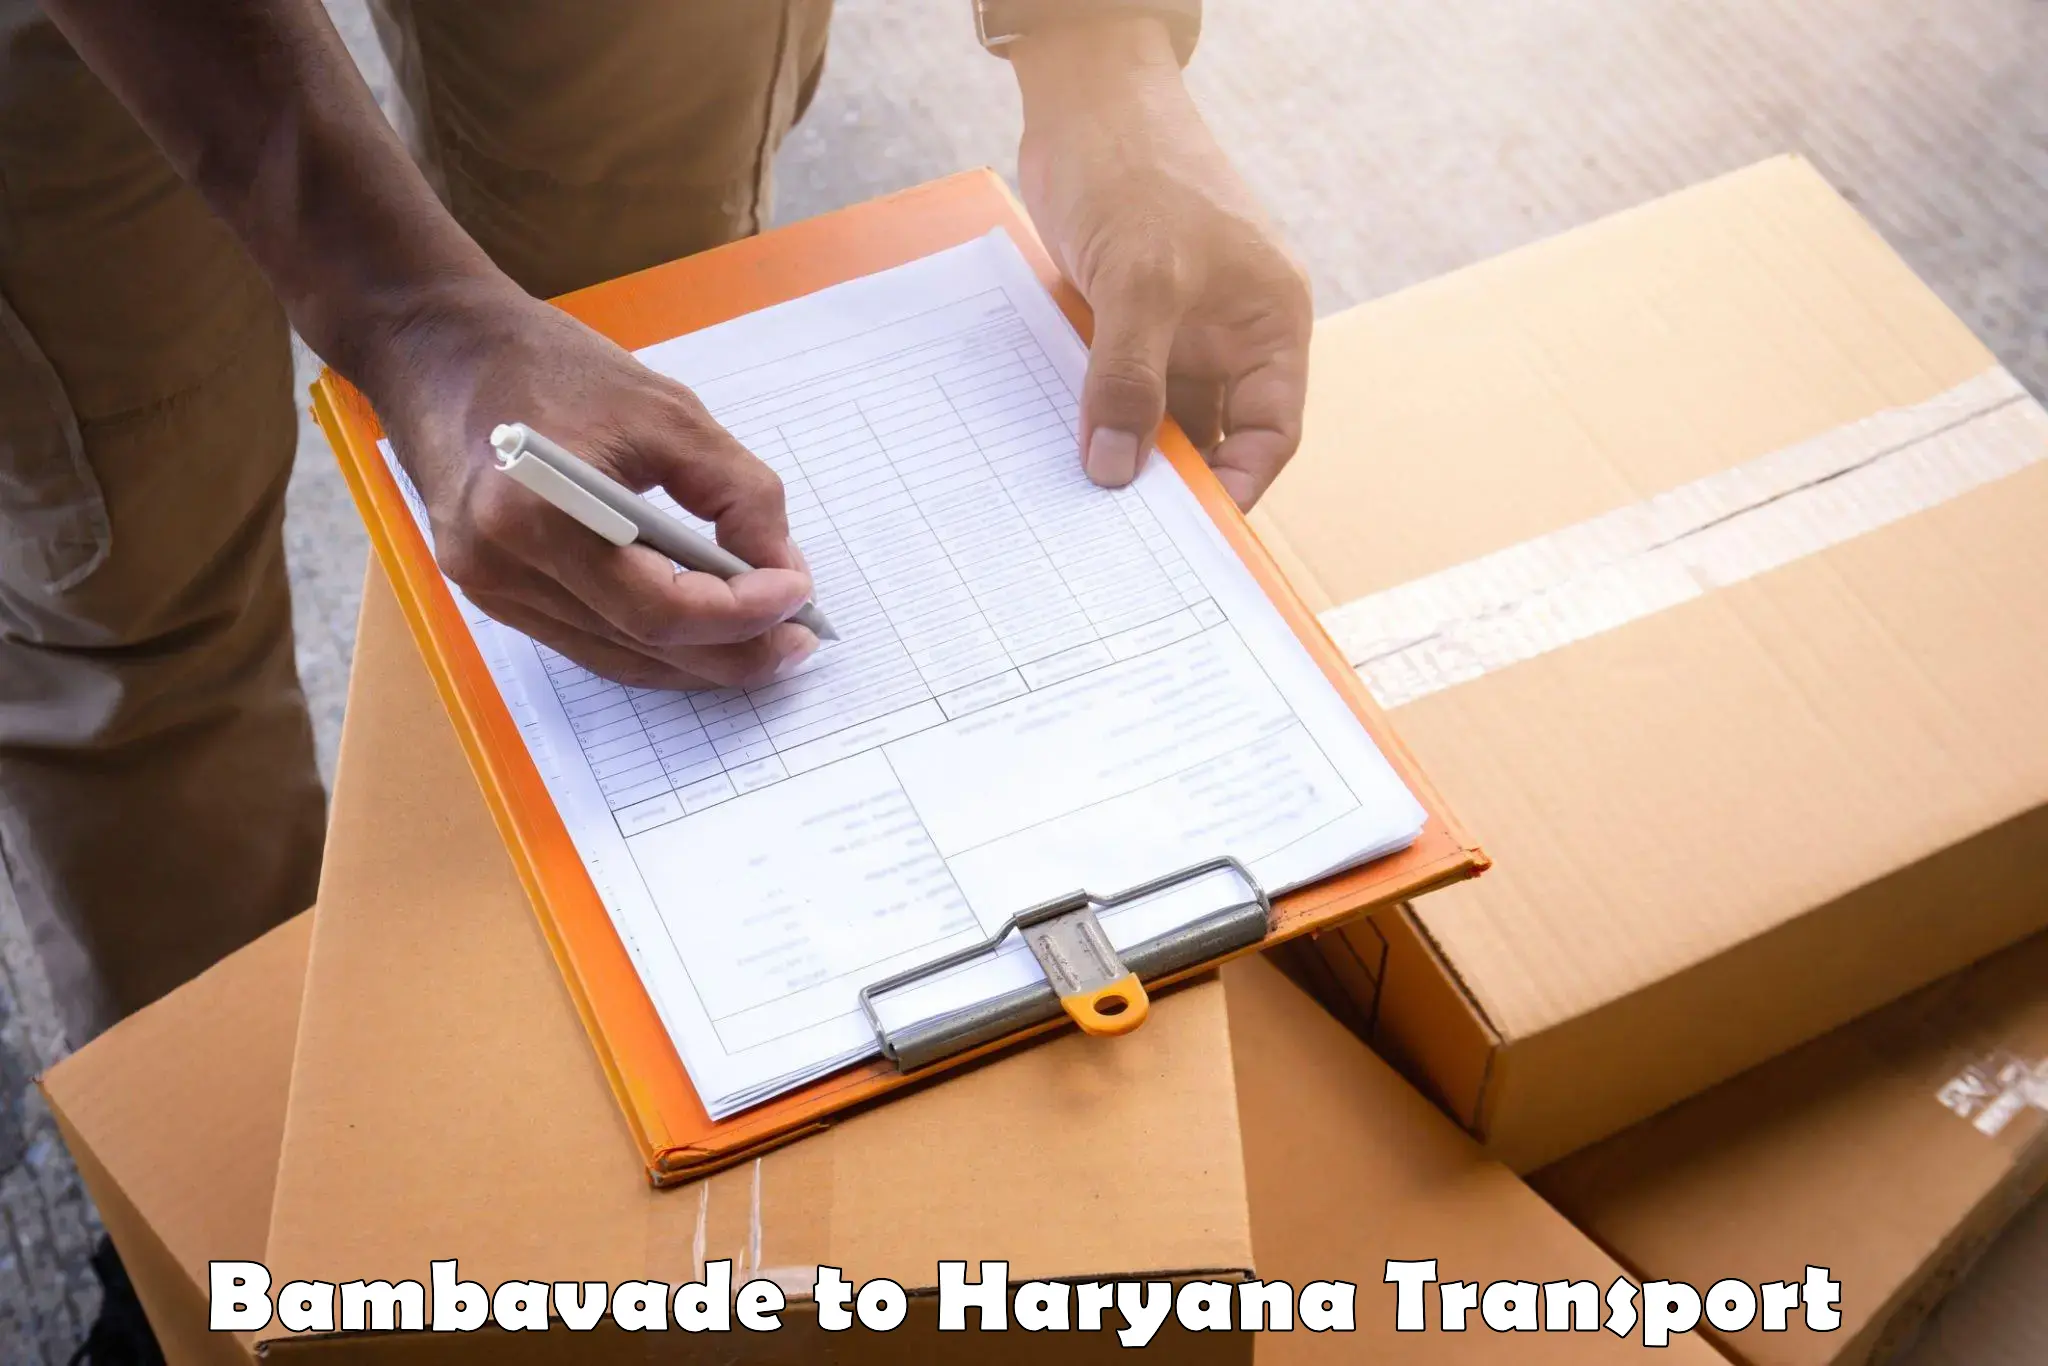 Best transport services in India Bambavade to Bilaspur Haryana